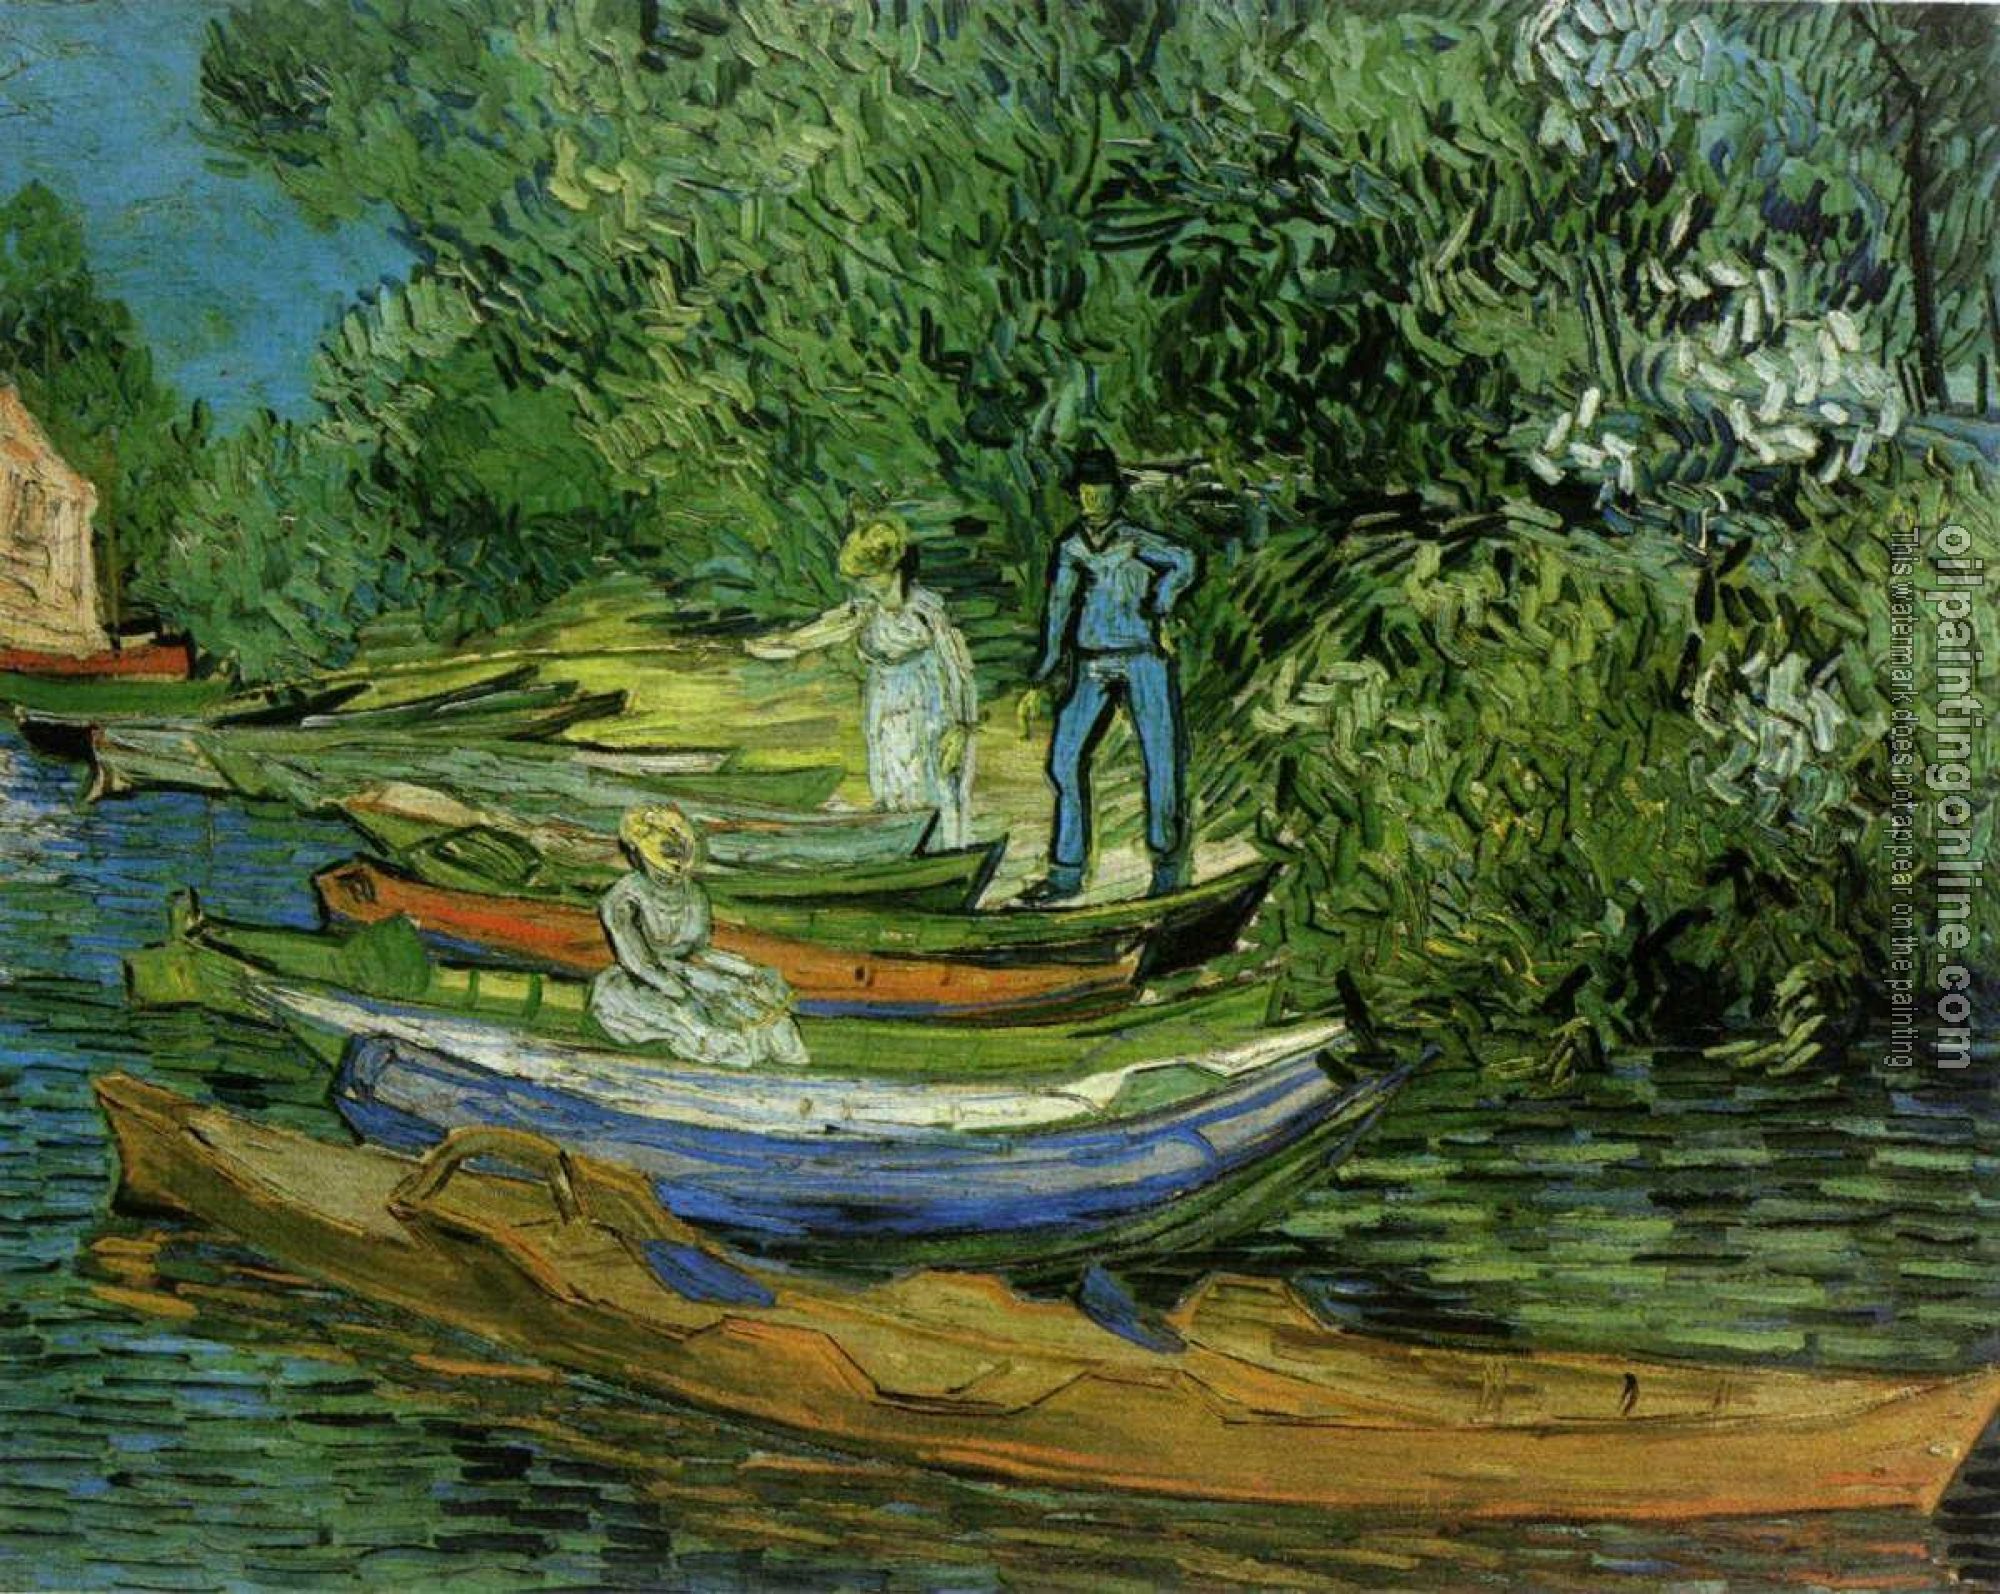 Gogh, Vincent van - Bank of the Oise at Auvers